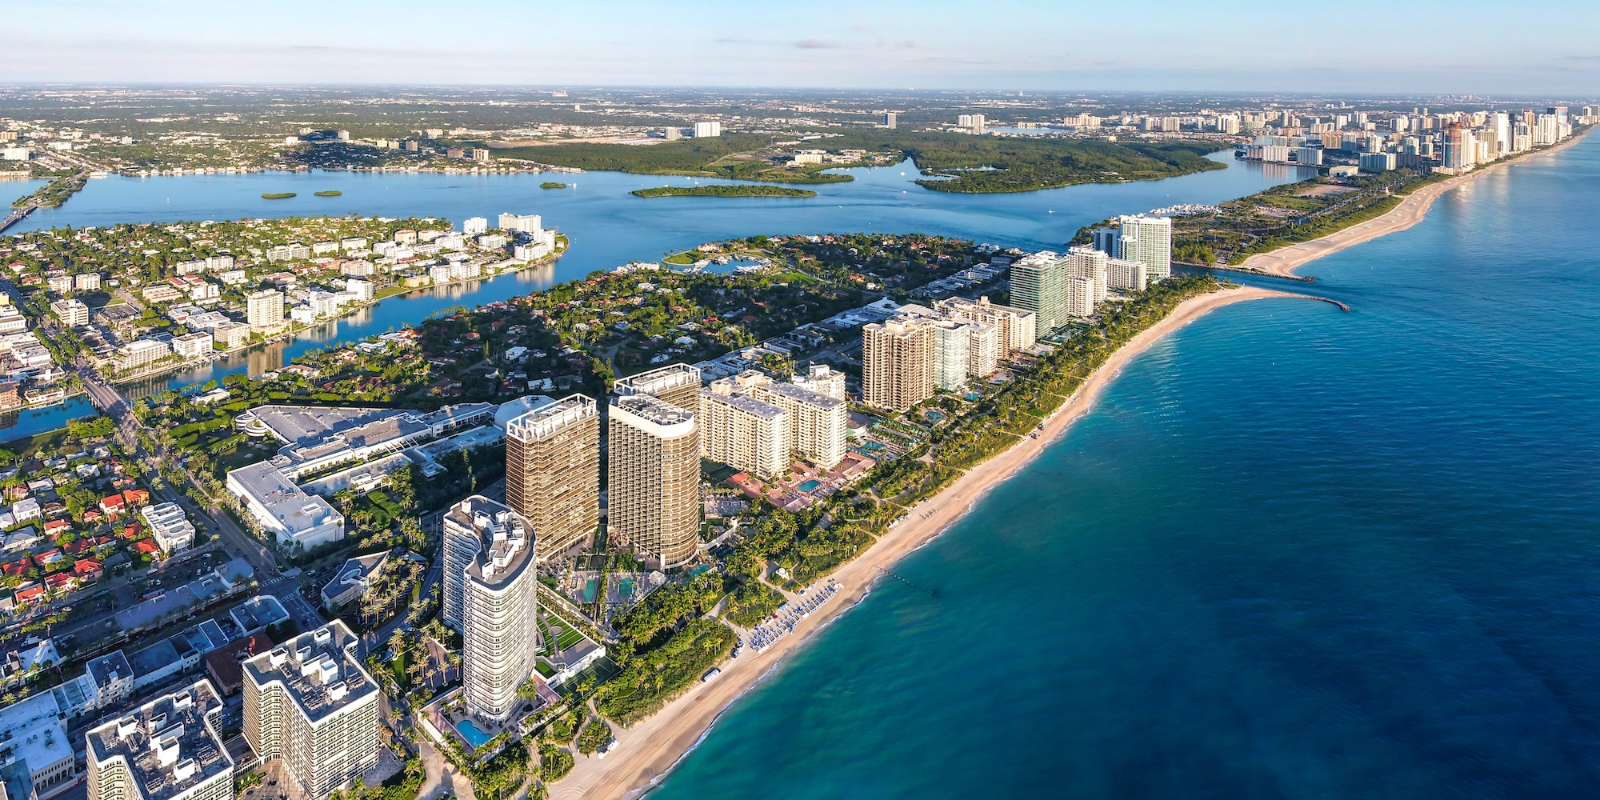 Bird's eye view of Bal Harbour Village skyline from the southeast.